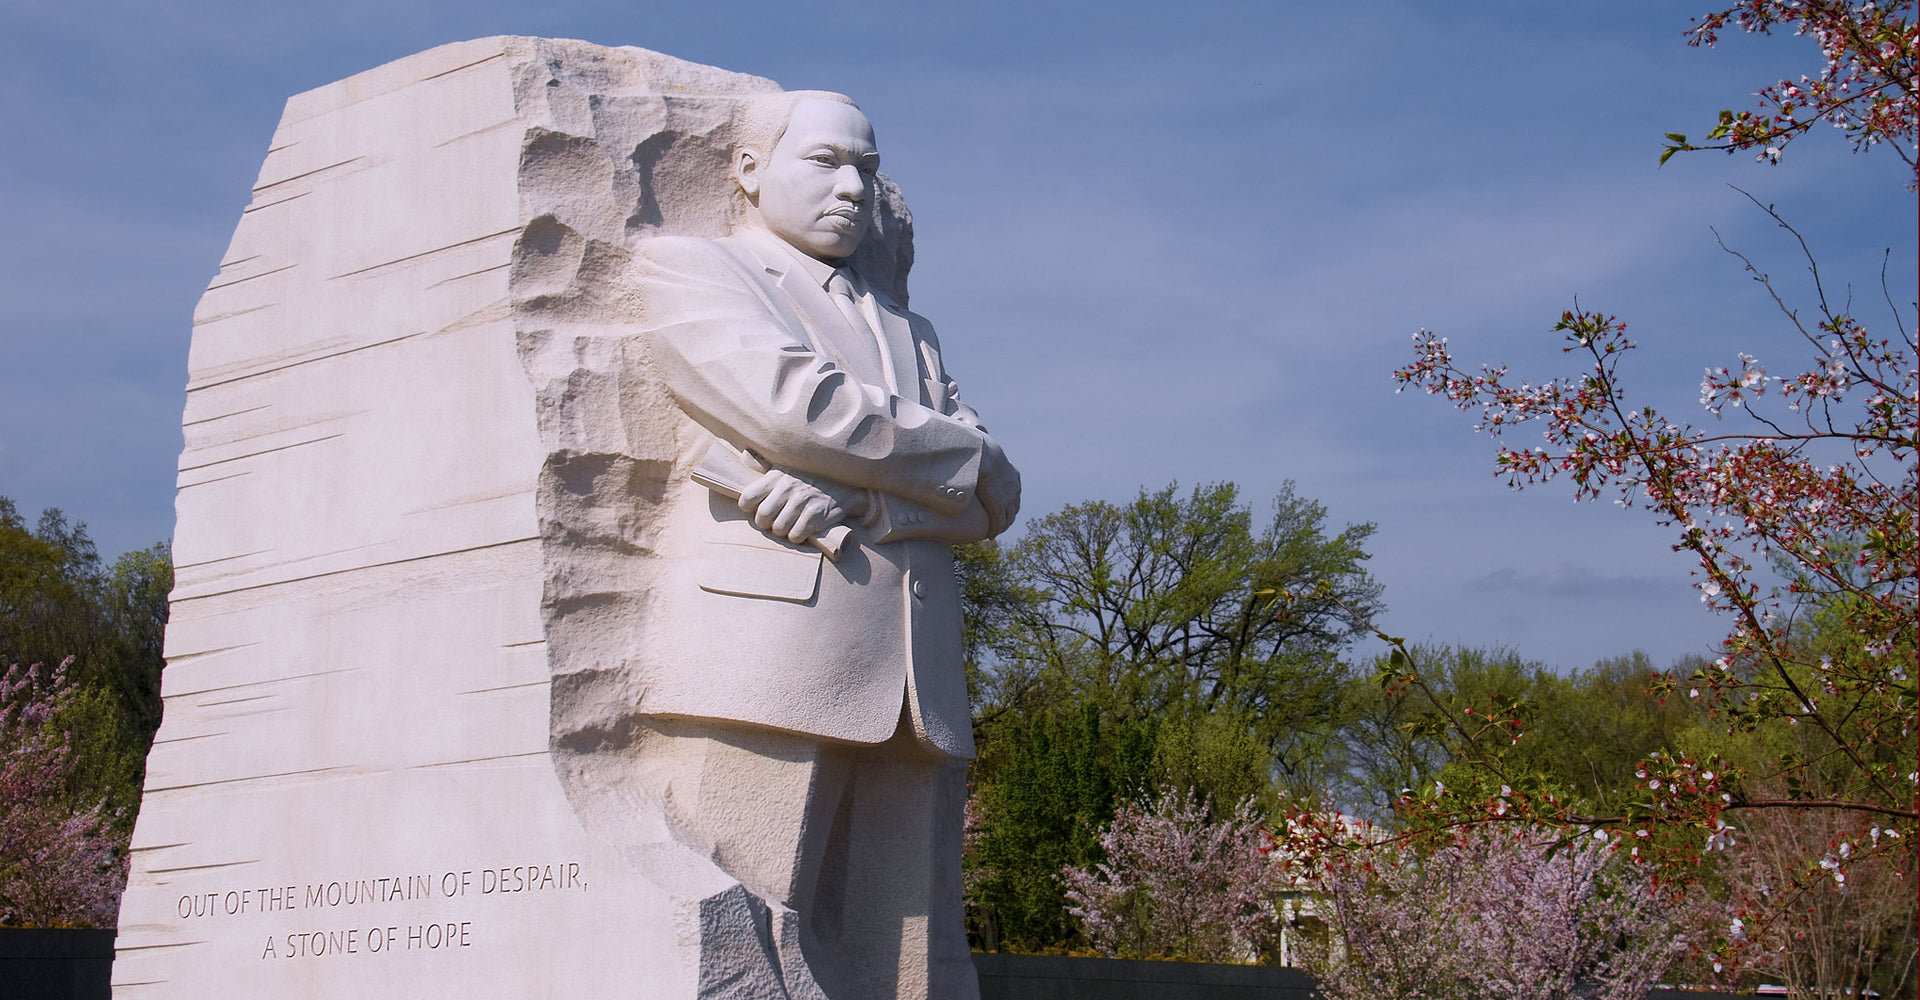 Martin Luther King Stone of Hope